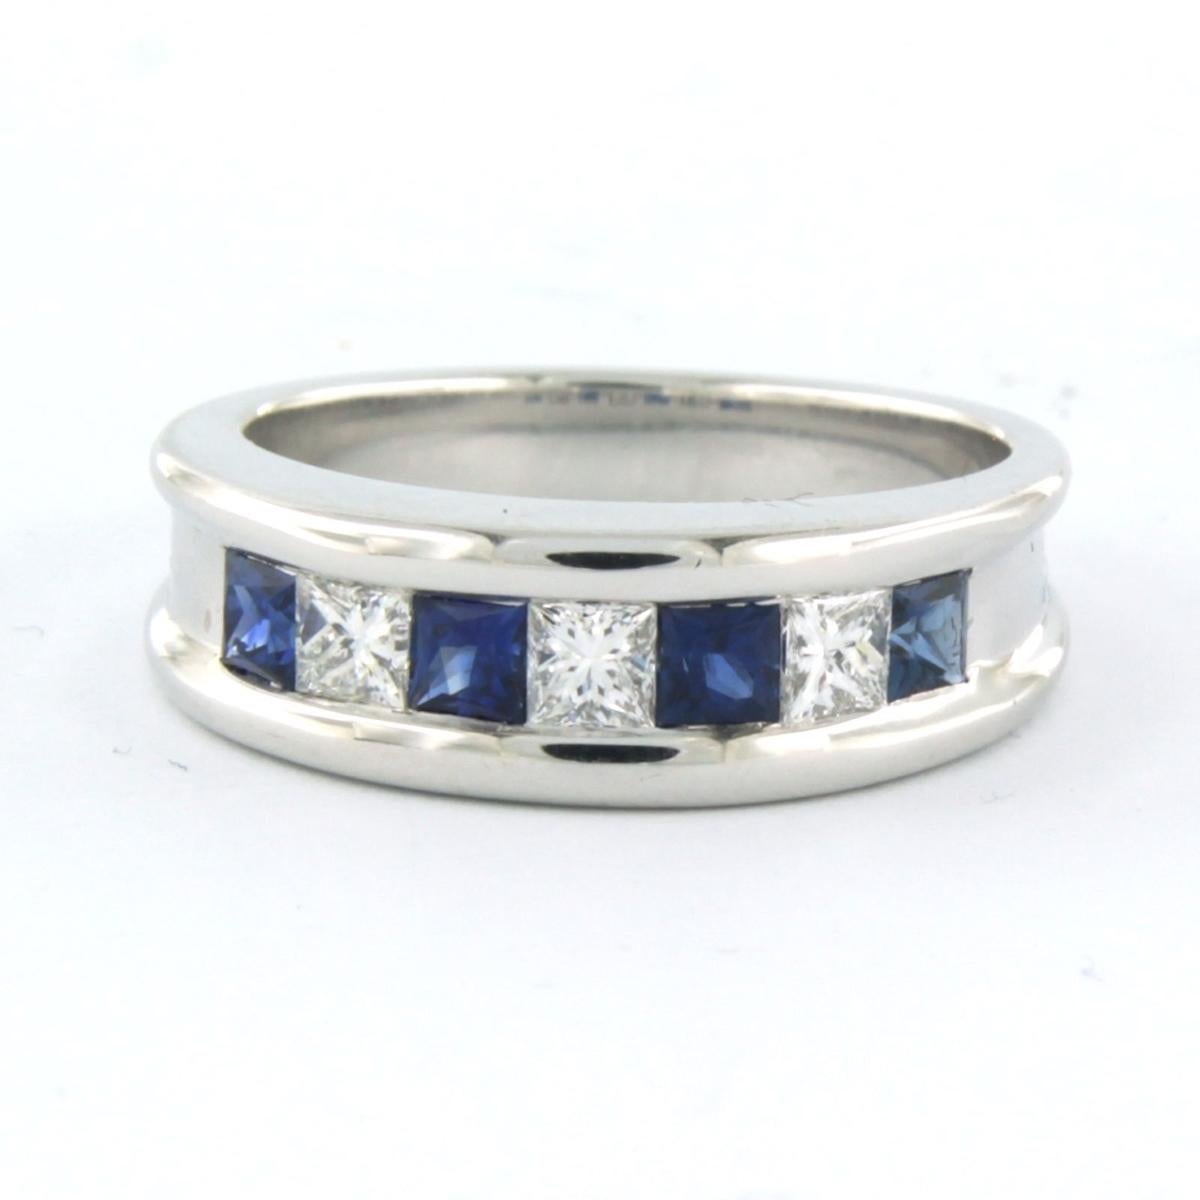 18k white gold ring set with sapphire and princess cut diamond. 0.38ct - F/G - VS/SI - ring size U.S. 6.5 - EU. 17(53)

detailed description:

the top of the ring is 6.2 mm wide

ring size U.S. 6.5 - EU. 17(53), ring can be reduced free of charge or